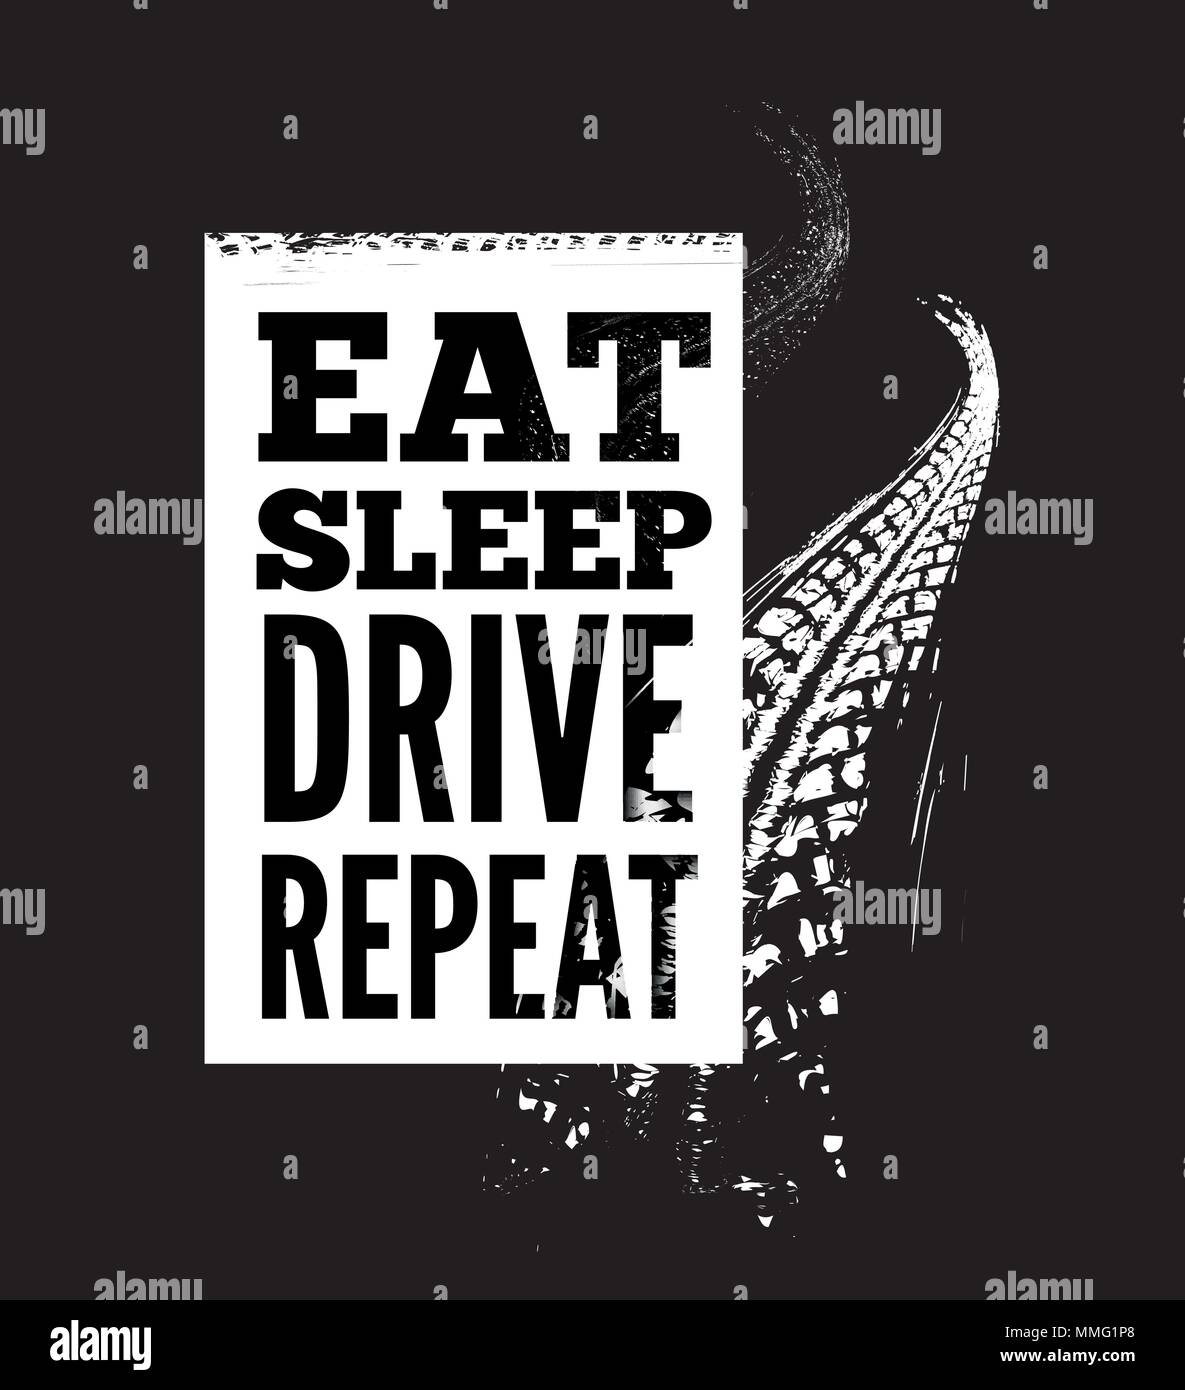 Eat sleep drive repeat text on tire tracks background Stock Vector